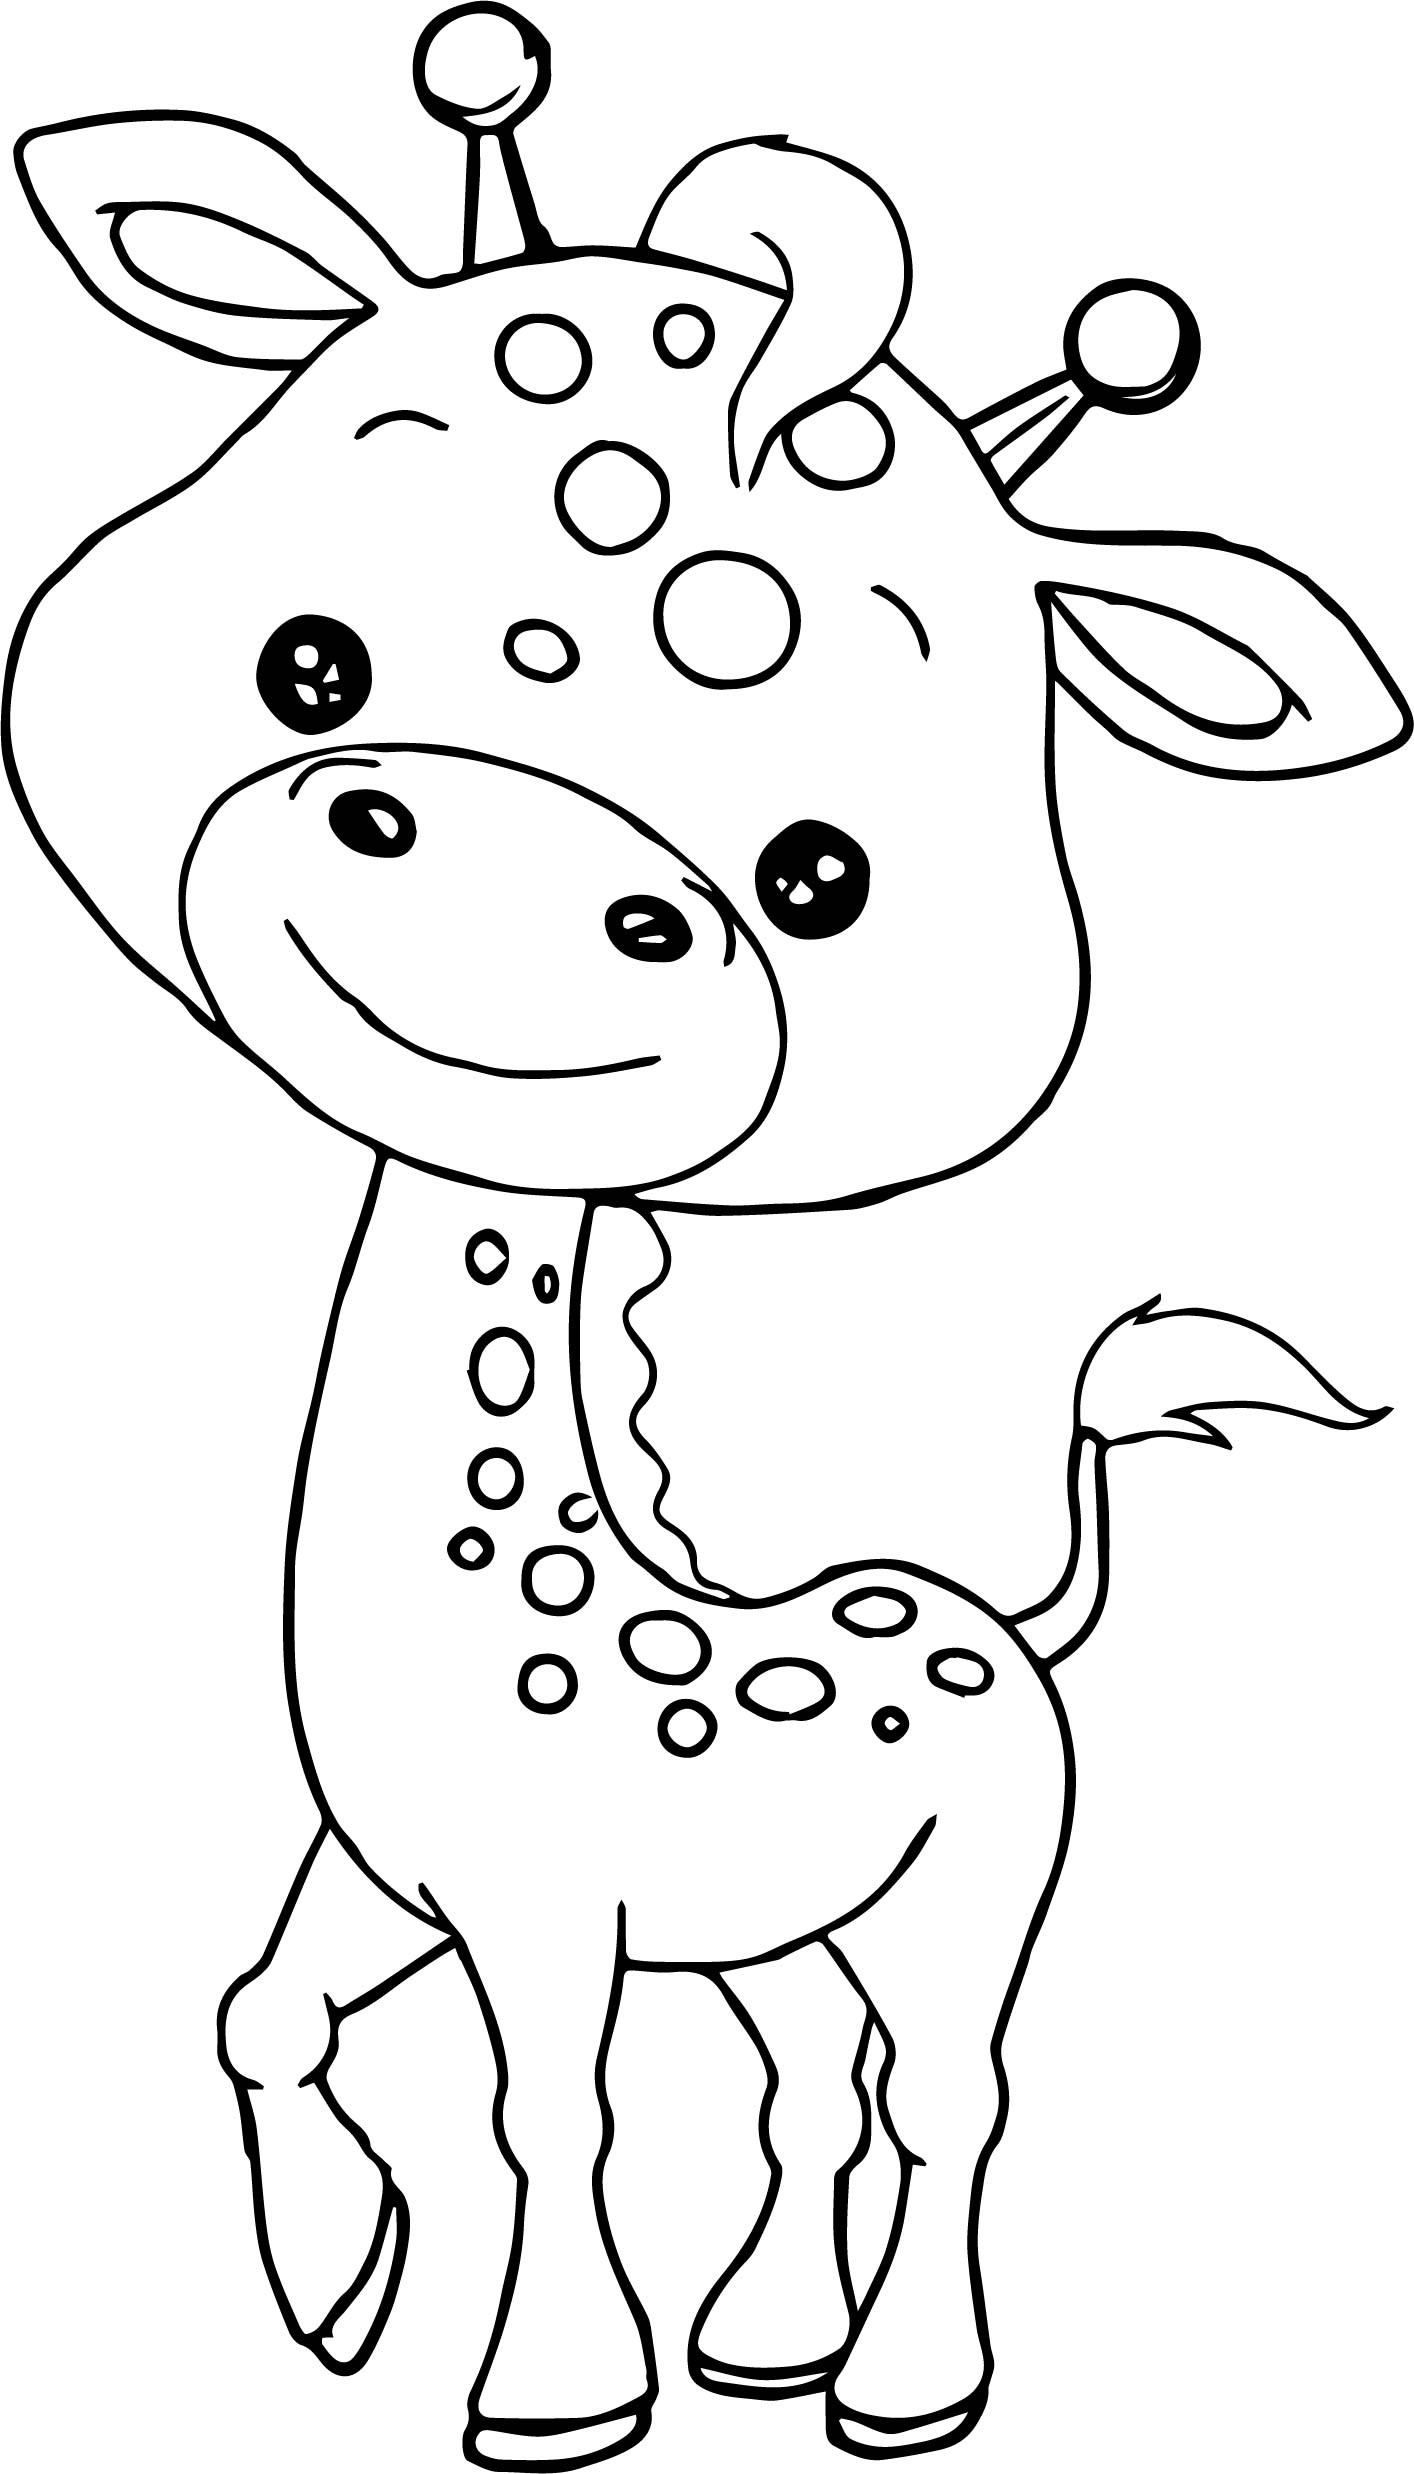 best-21-coloring-pages-baby-animals-home-family-style-and-art-ideas